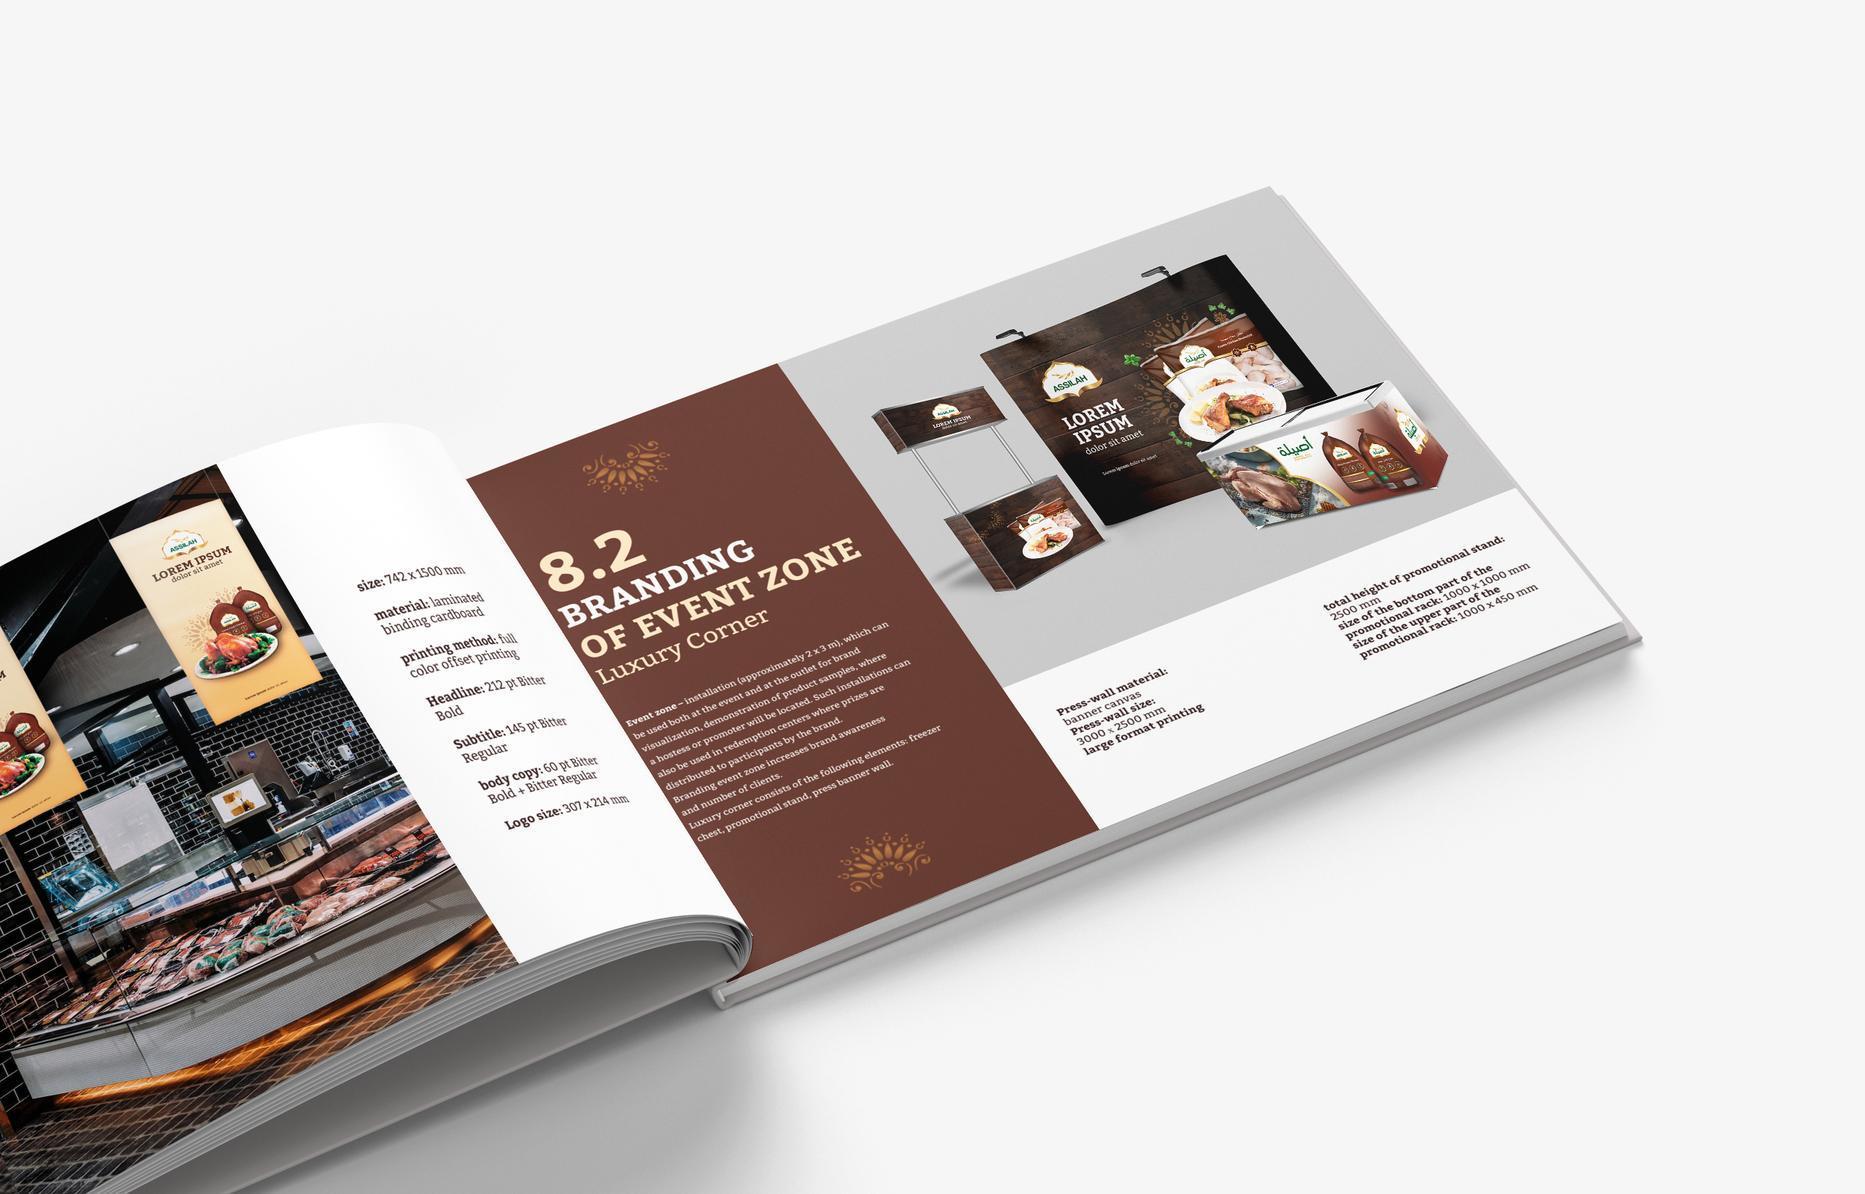 Project: Launching the MHP brand on the Arab market. Identity, brand book — Rubarb - Image - 11